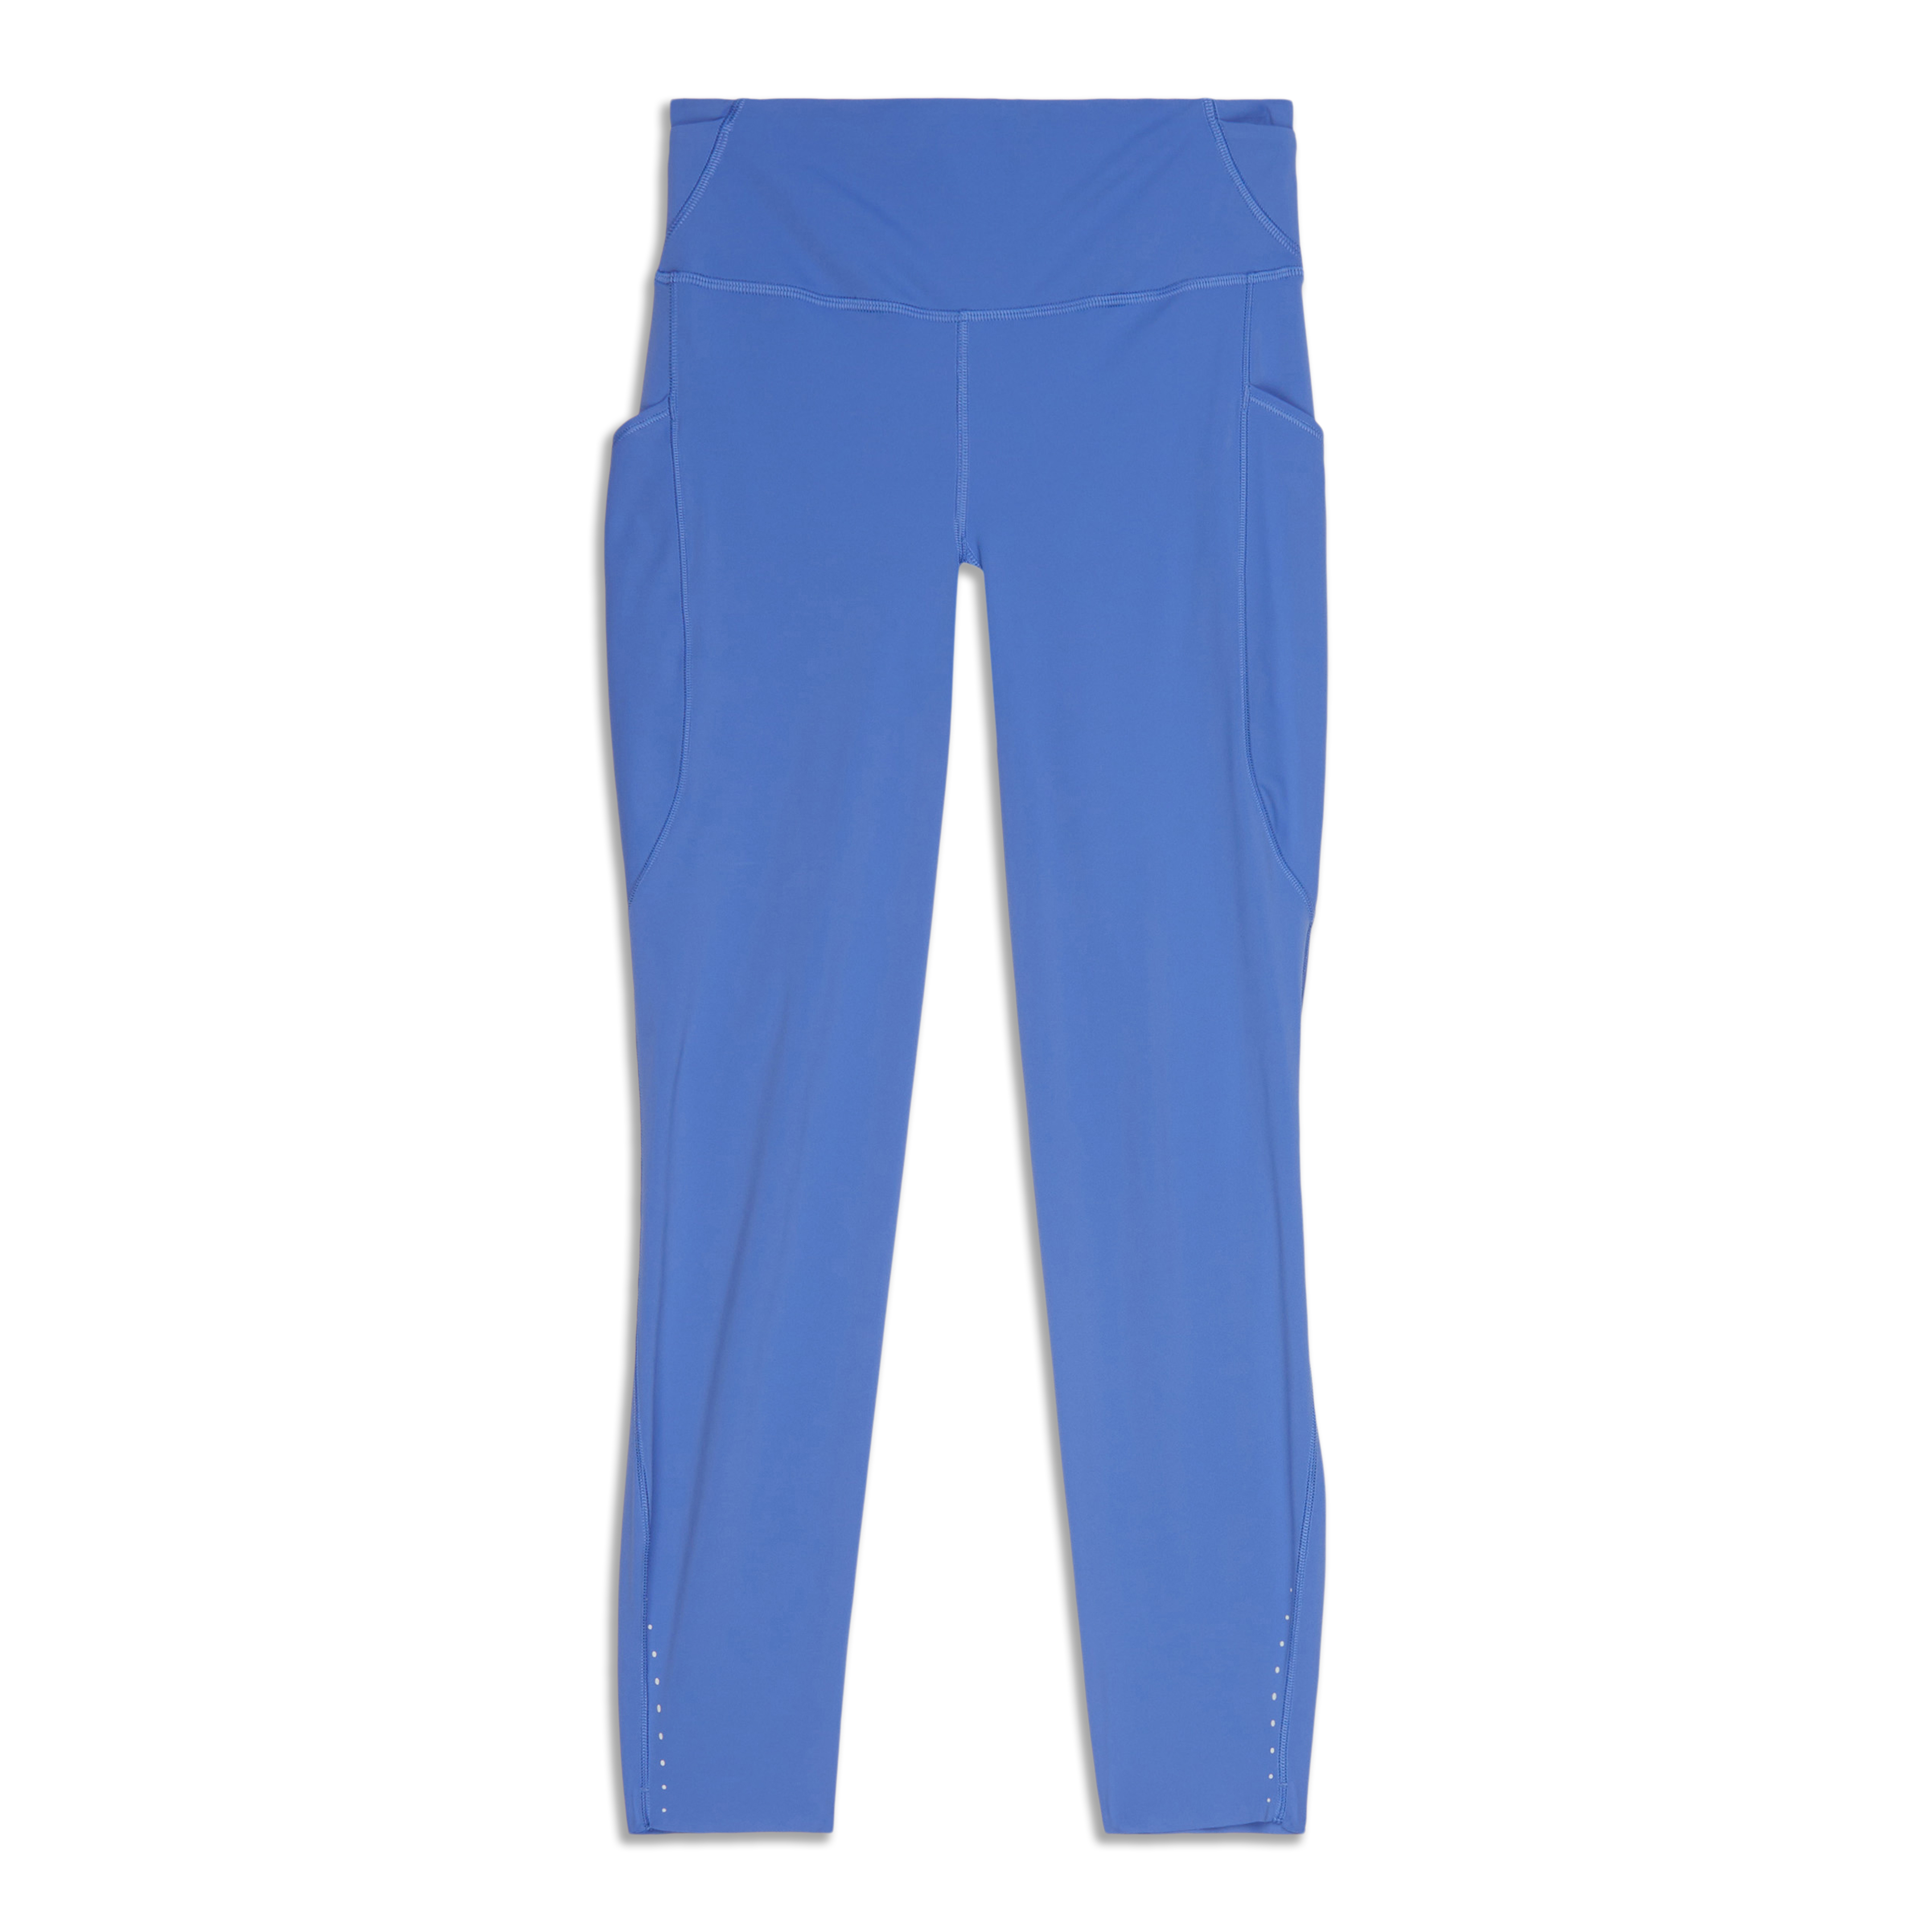 Lululemon Fast And Free 25” Legging Blue Size 2 - $75 (41% Off Retail) -  From Emily